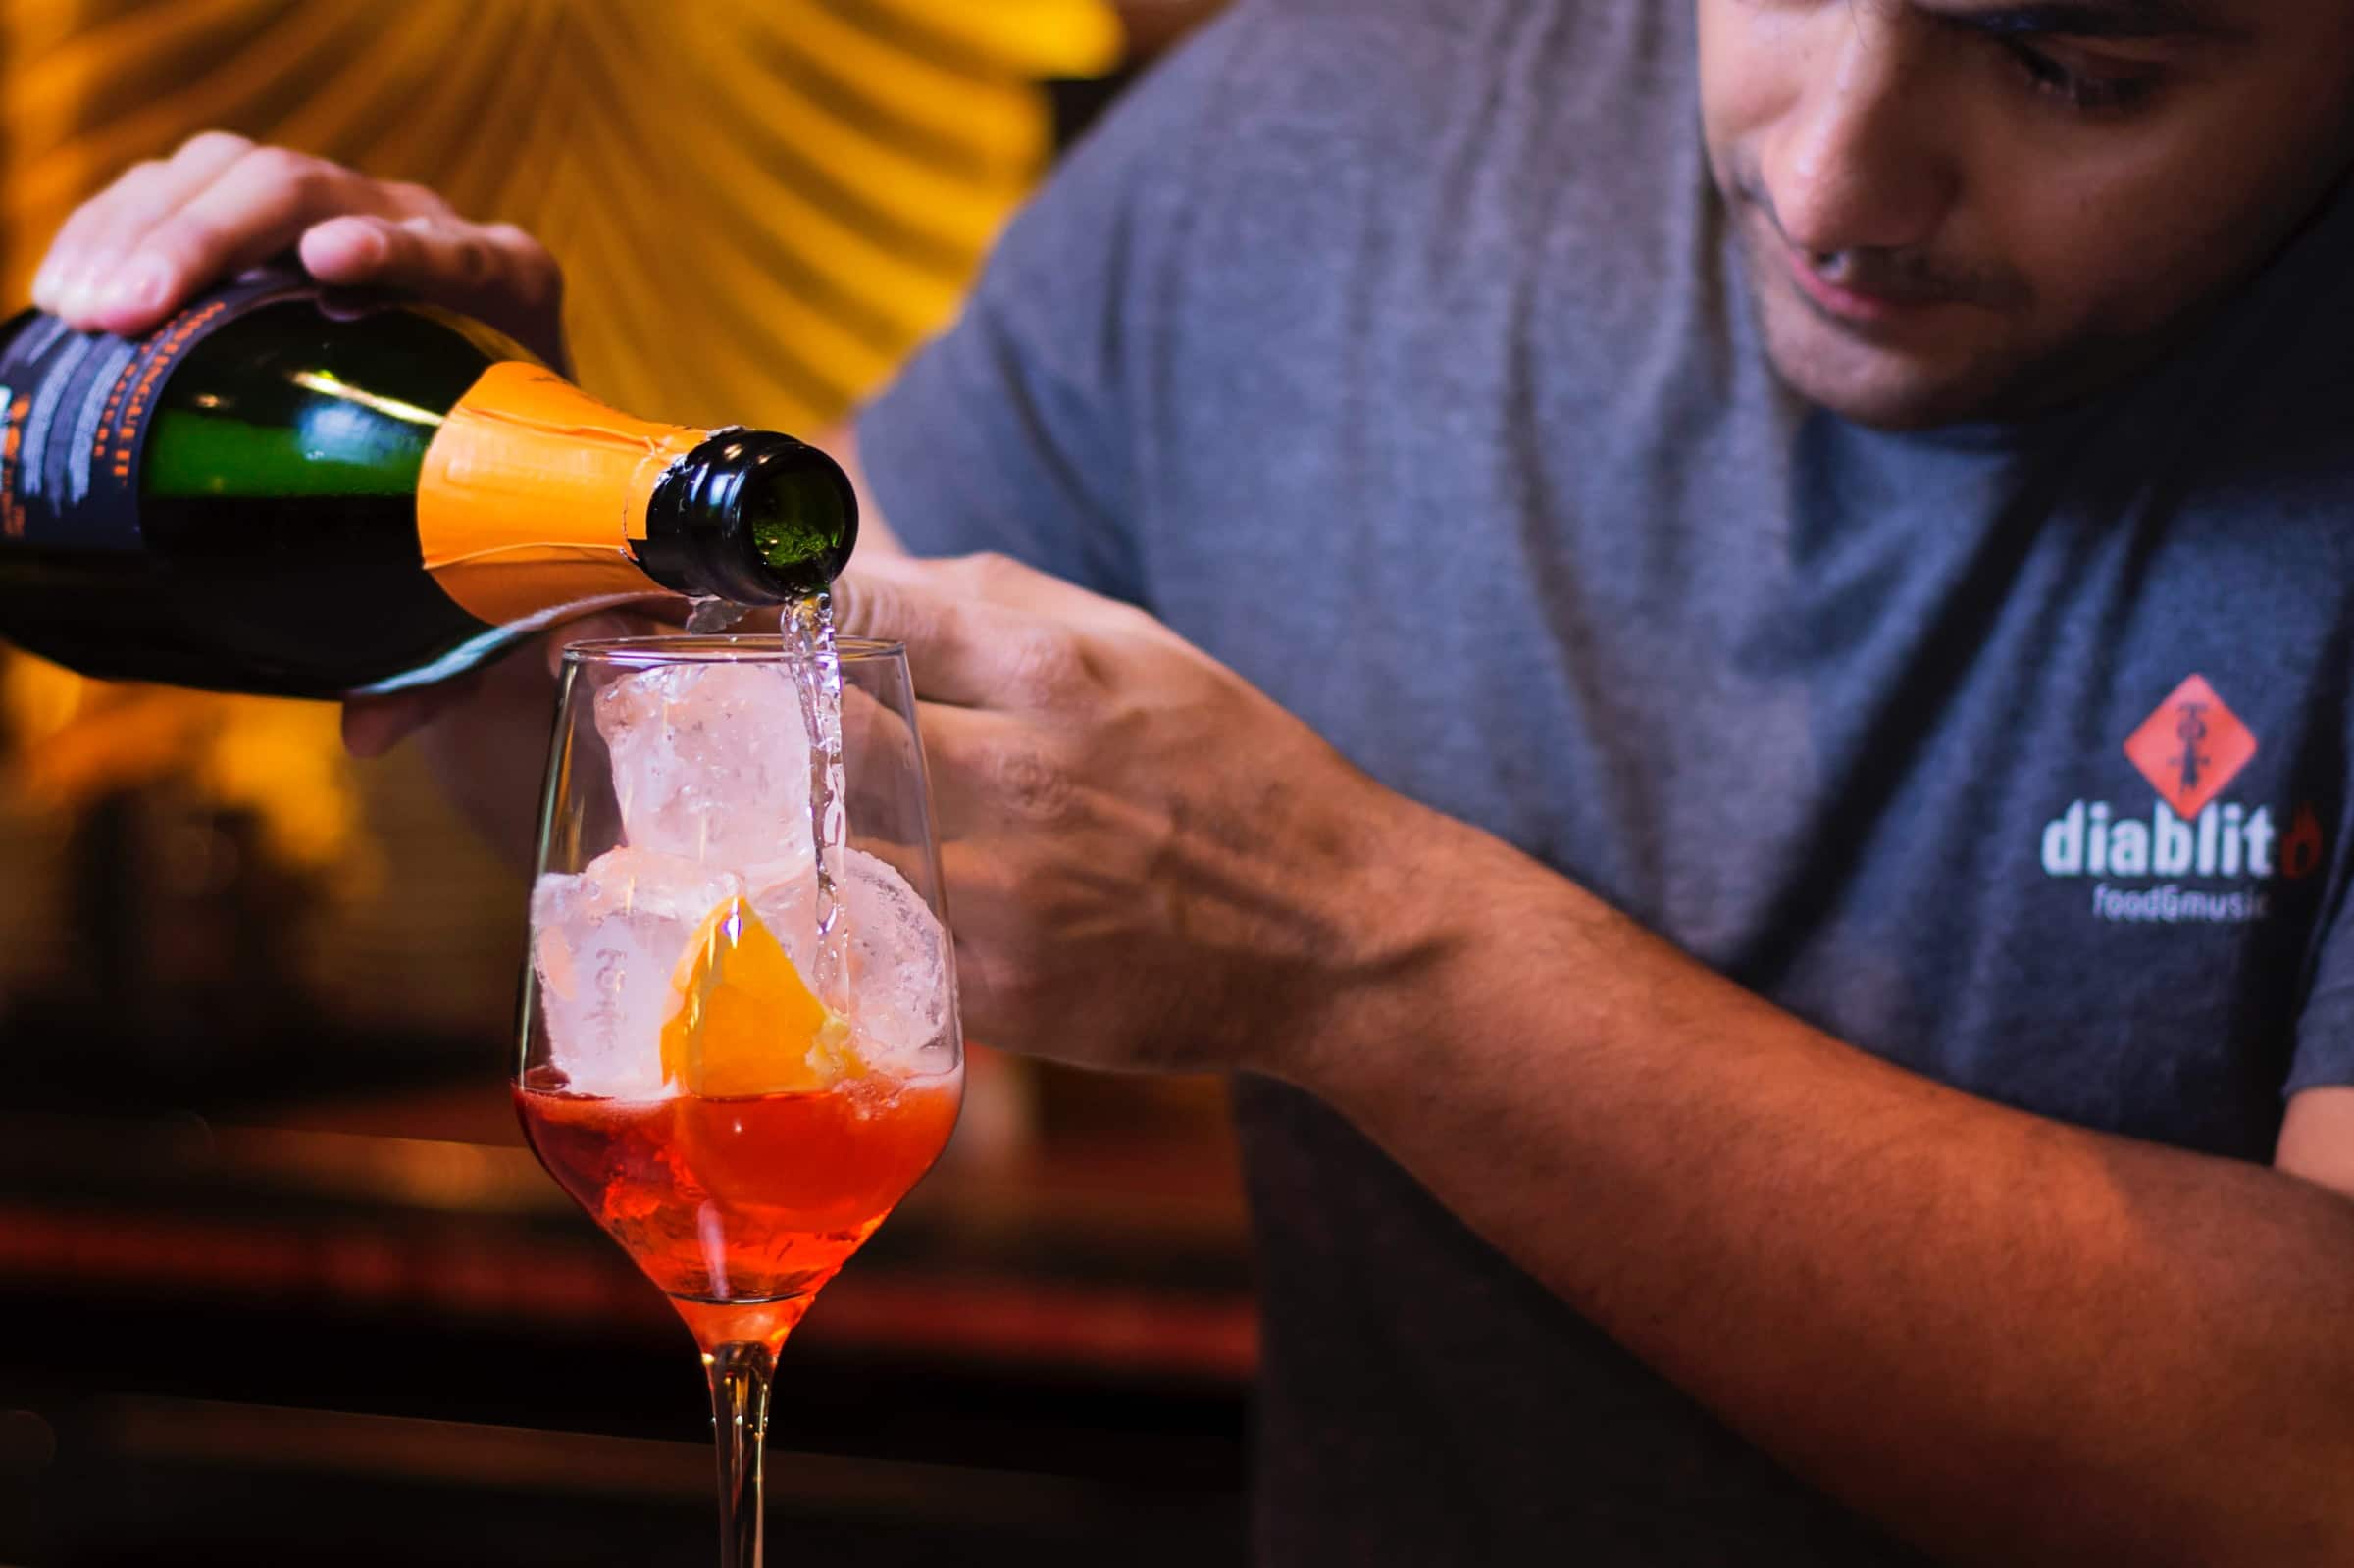 A male bartender shows how to build a cocktail by pouring sparkling wine into a wine glass filled with ice and an orange liqueur. Photo by Kike Salazar N on Unsplash